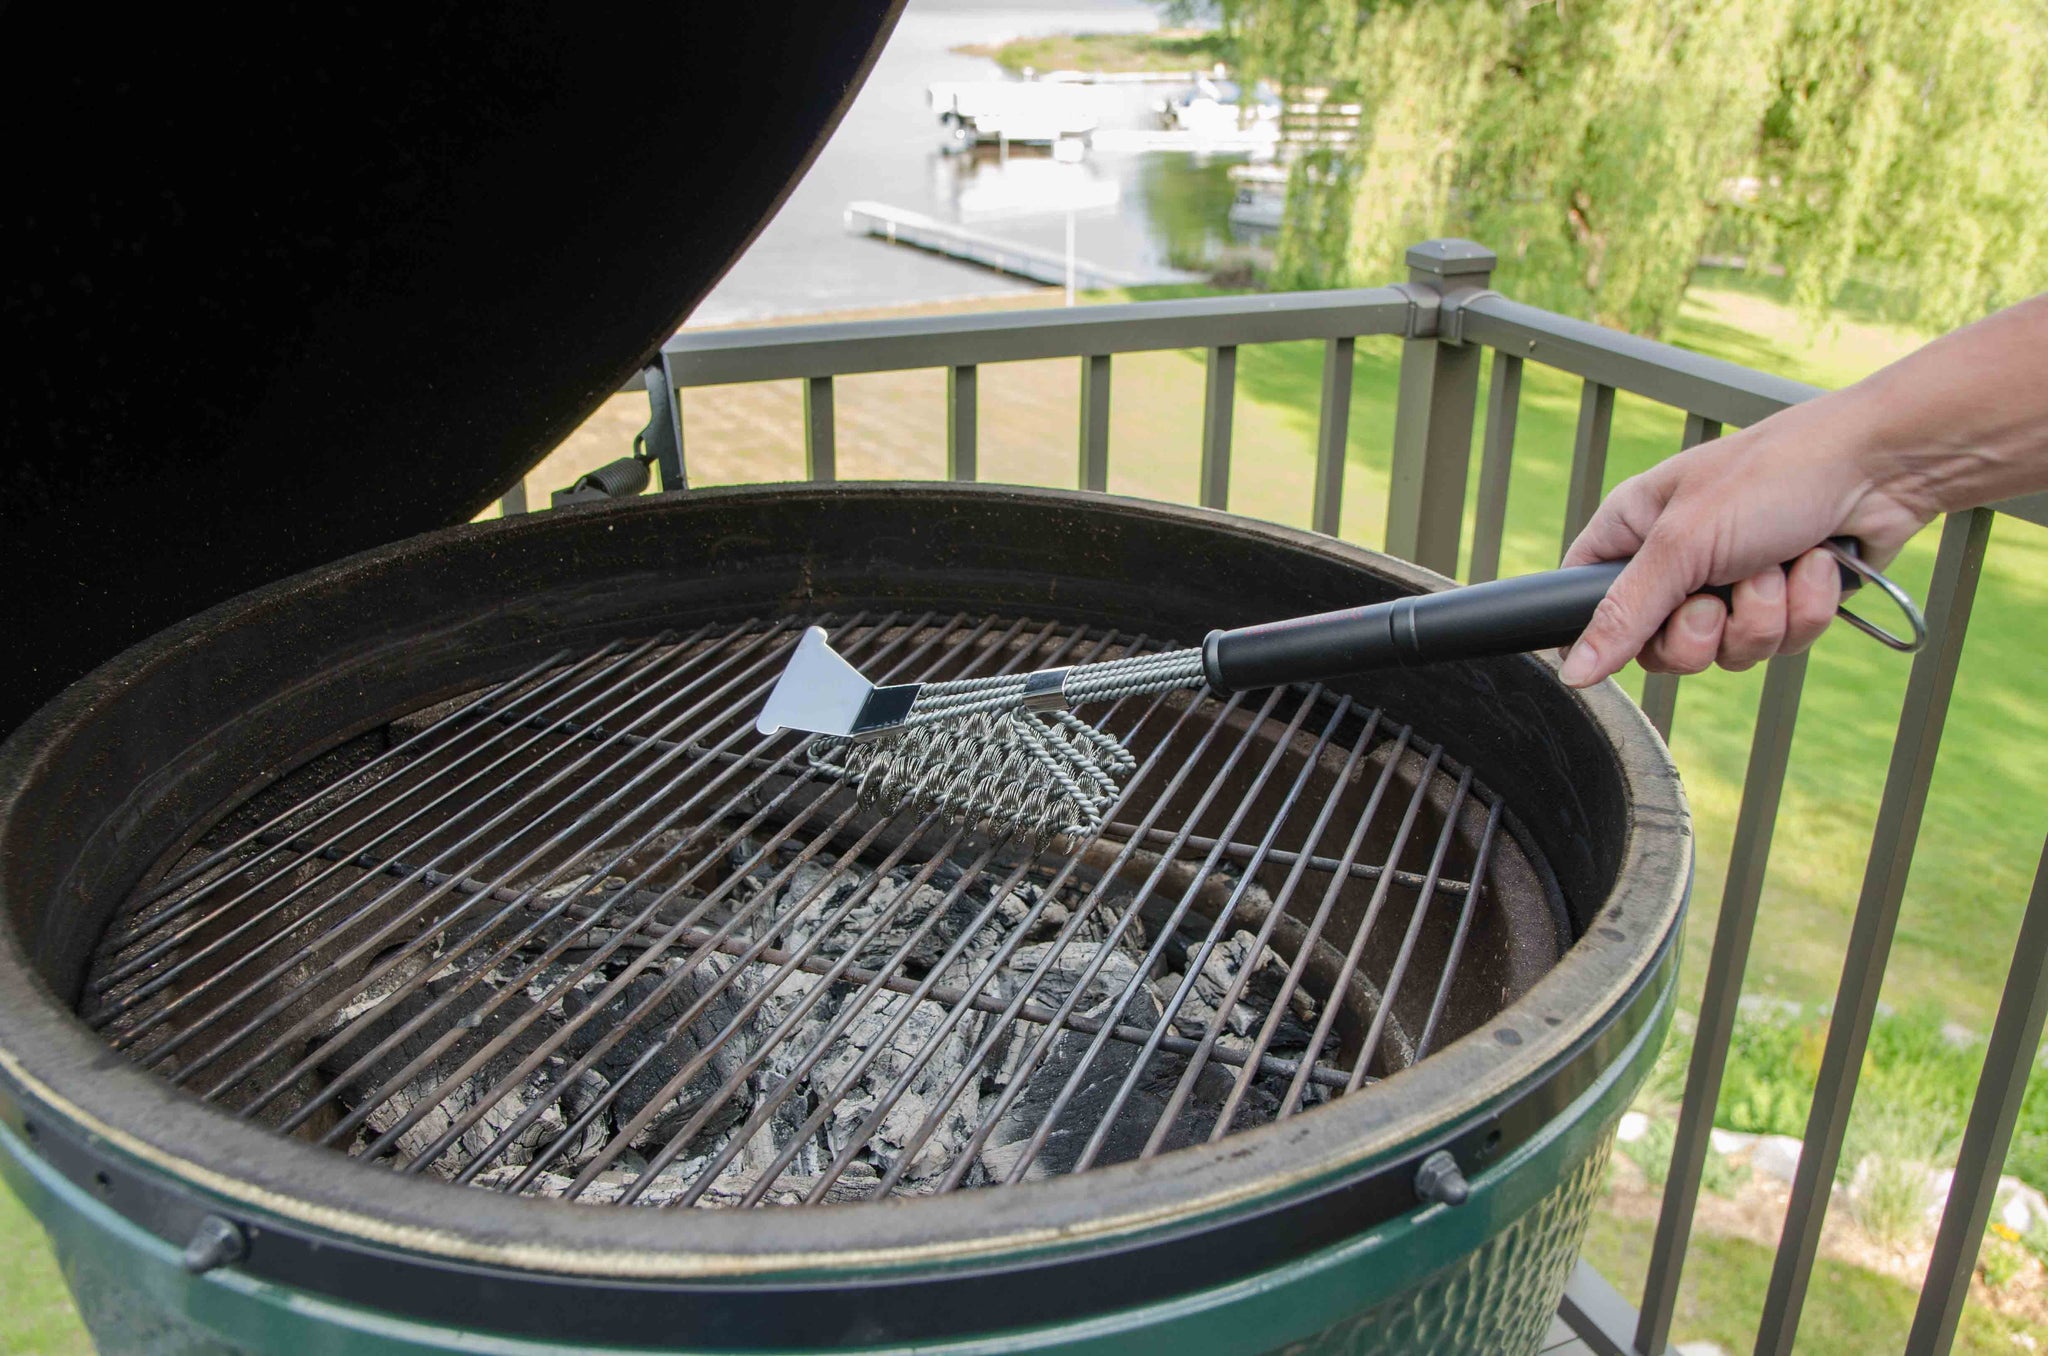 Pure Grill 3-in-1 Stainless Steel Bristle Free BBQ Grill Brush and Scraper for Cleaning Grates